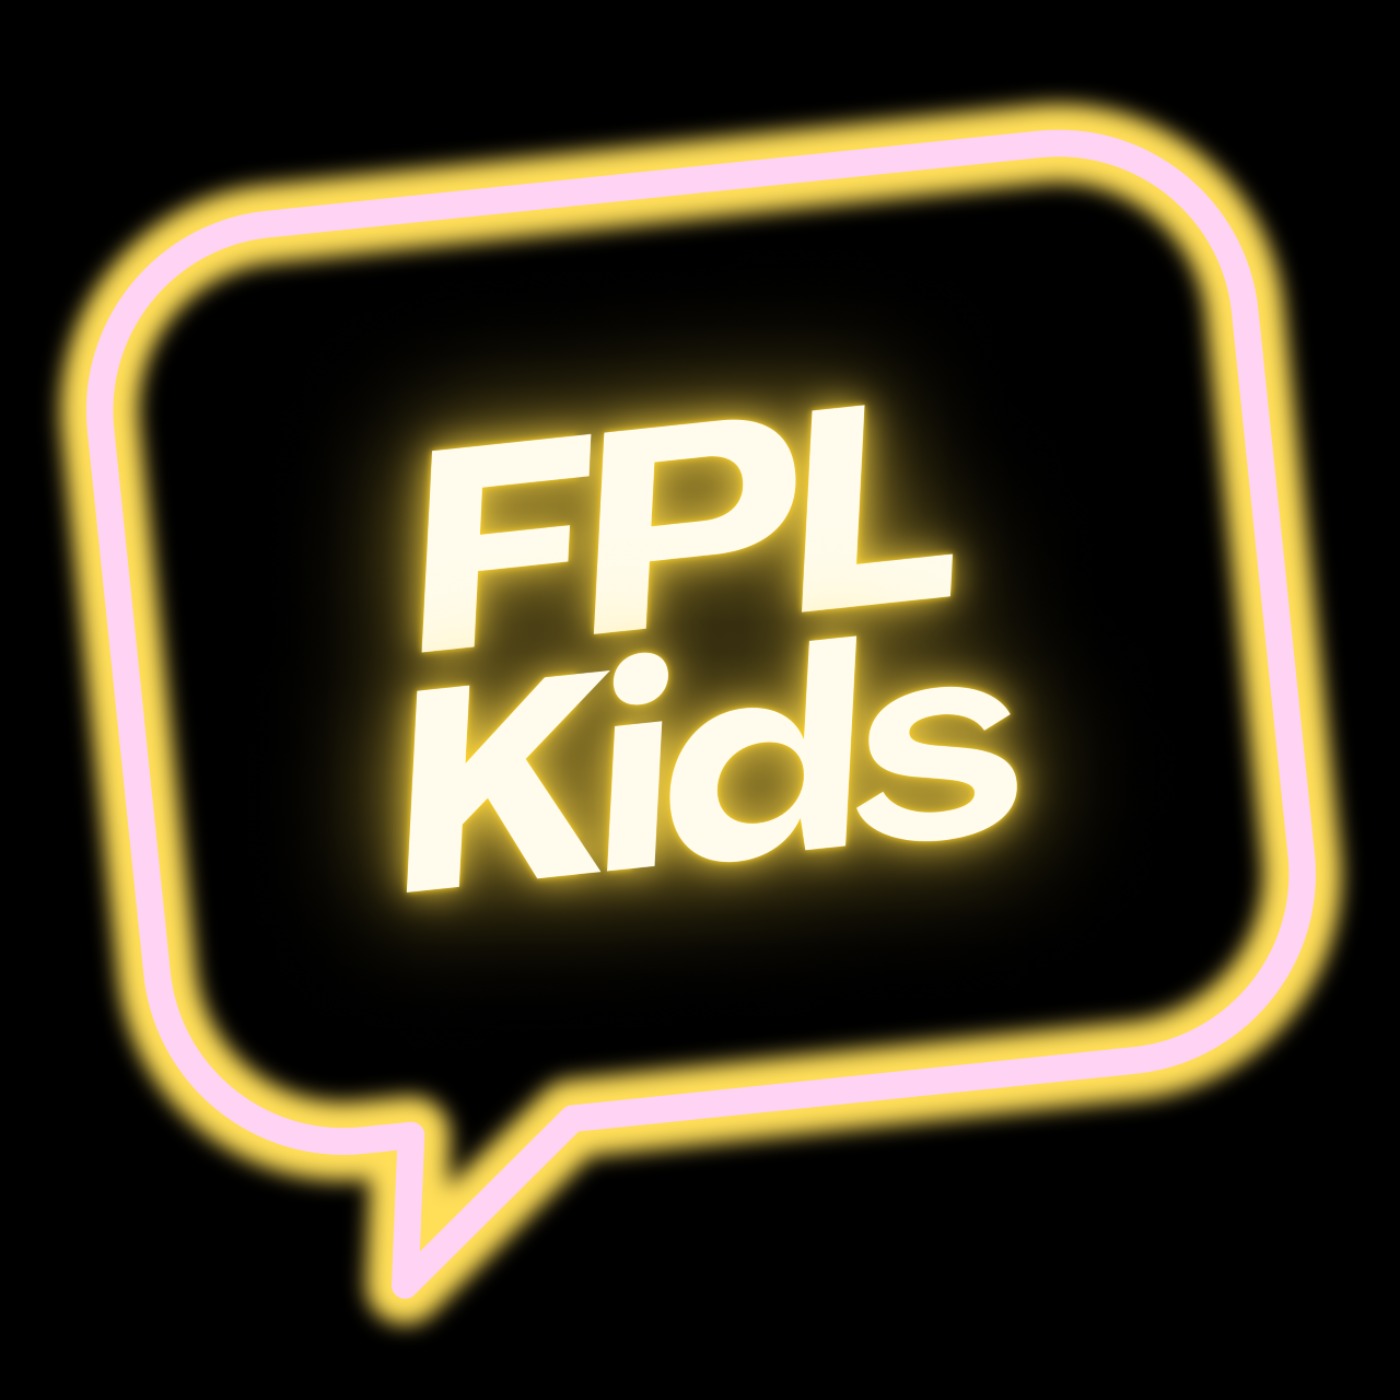 cover art for FPL Kids: Episode 84 ("And that's why I'm so happy")